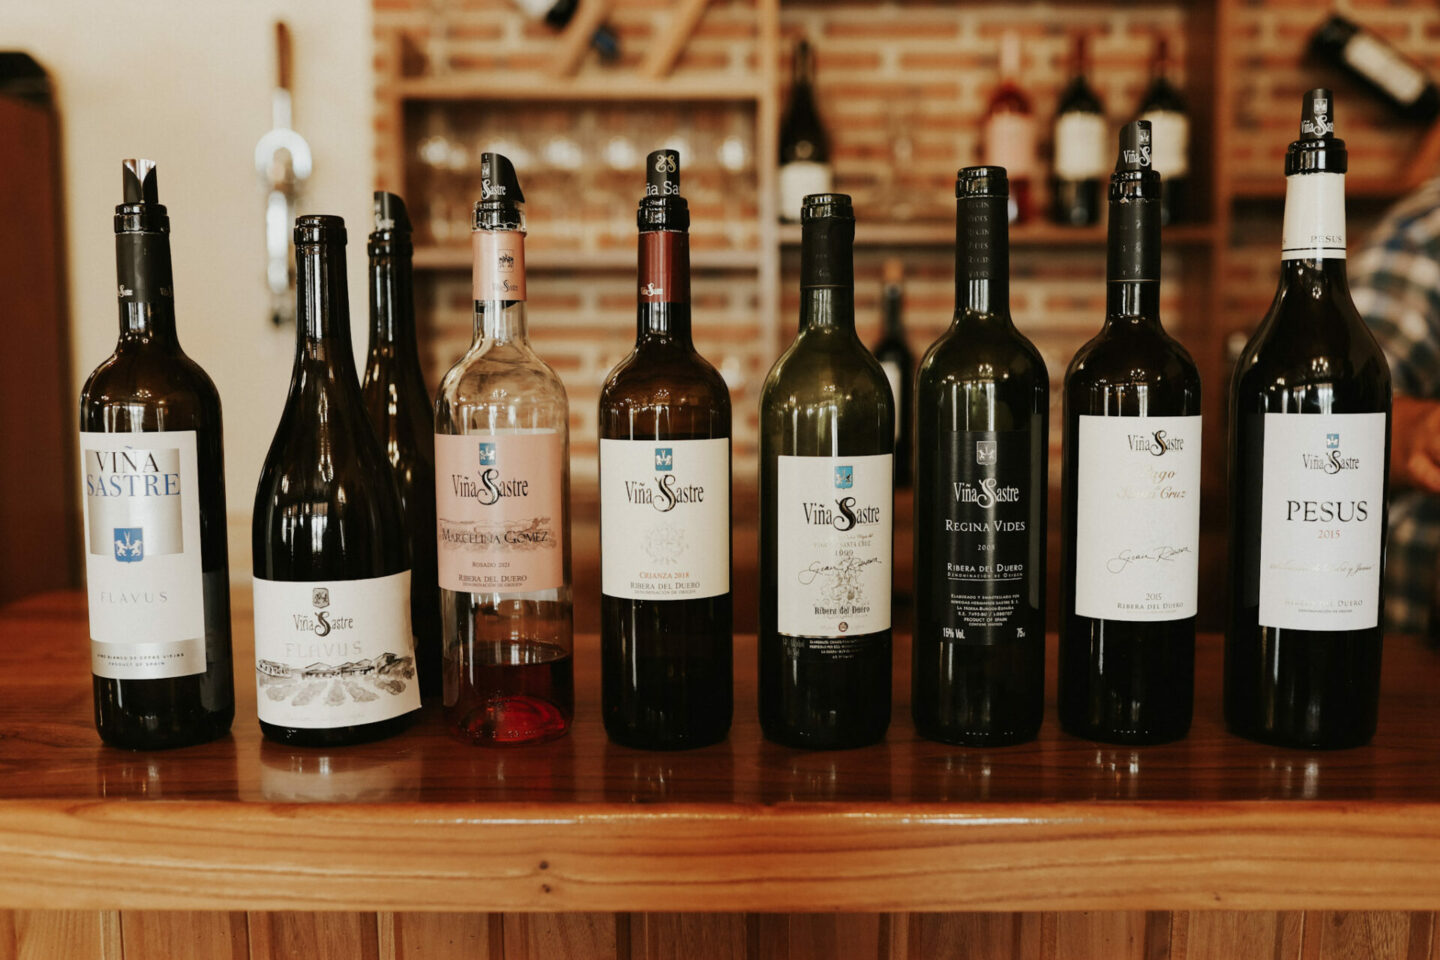 A lineup of Spanish red wines in Spain